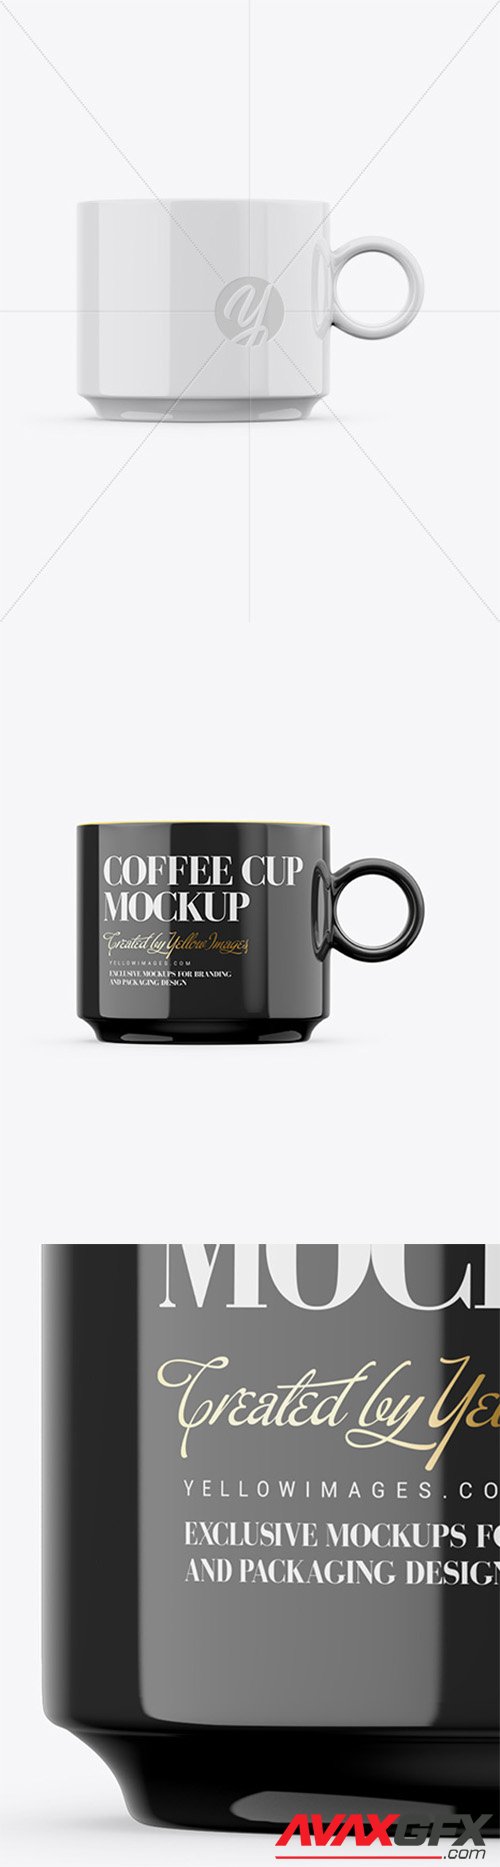 Glossy Paper Coffee Cup Mockup - Front View 31833 TIF ...